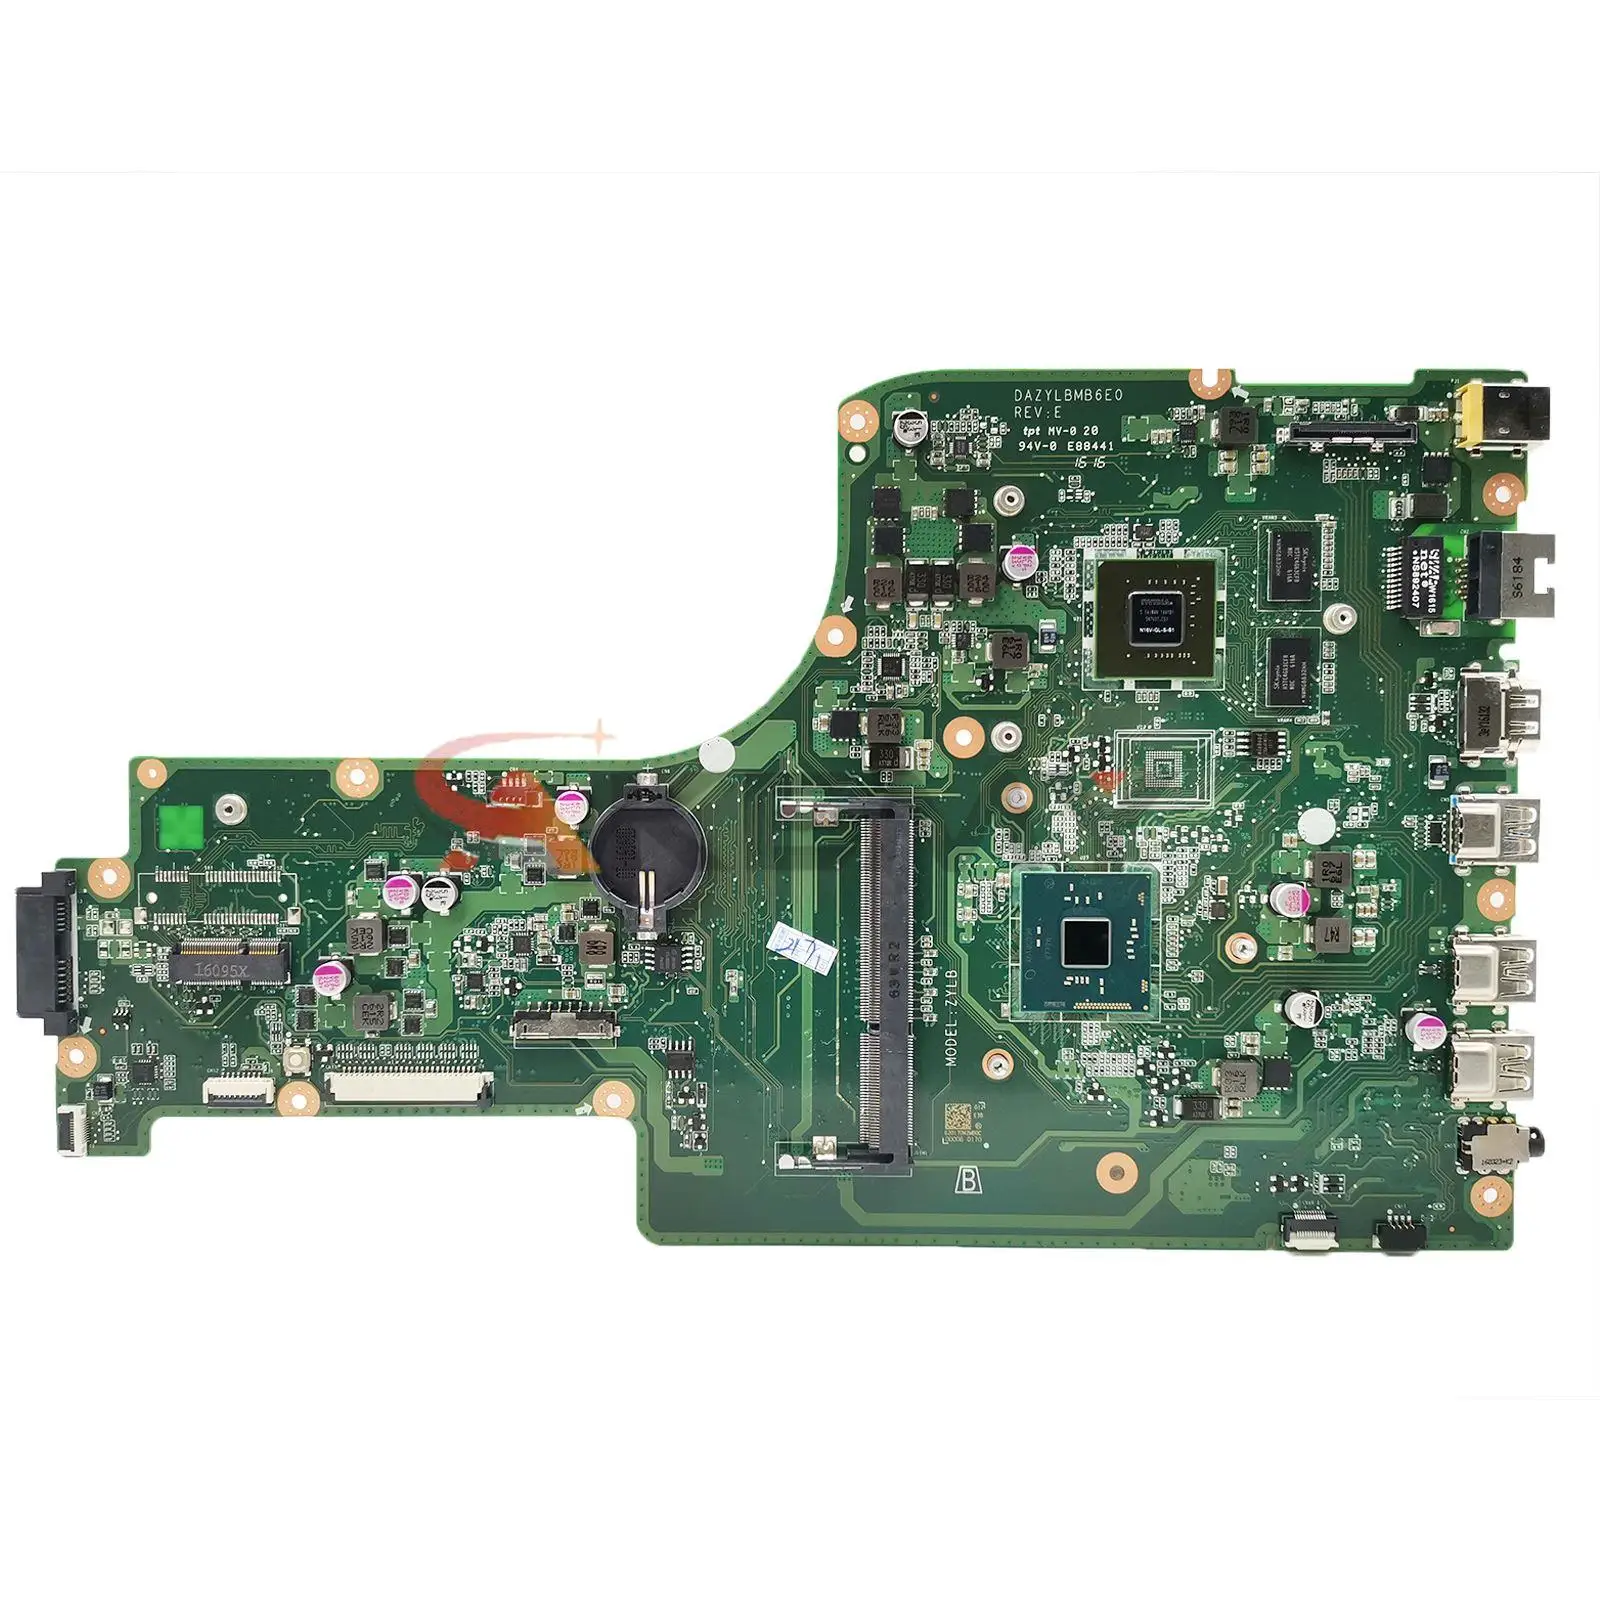 

Laptop motherboard For ACER Aspire ES1-731 N3160 GPU 910M 2GB Mainboard DAZYLBMB6E0 REV:E Fully tested and works perfect